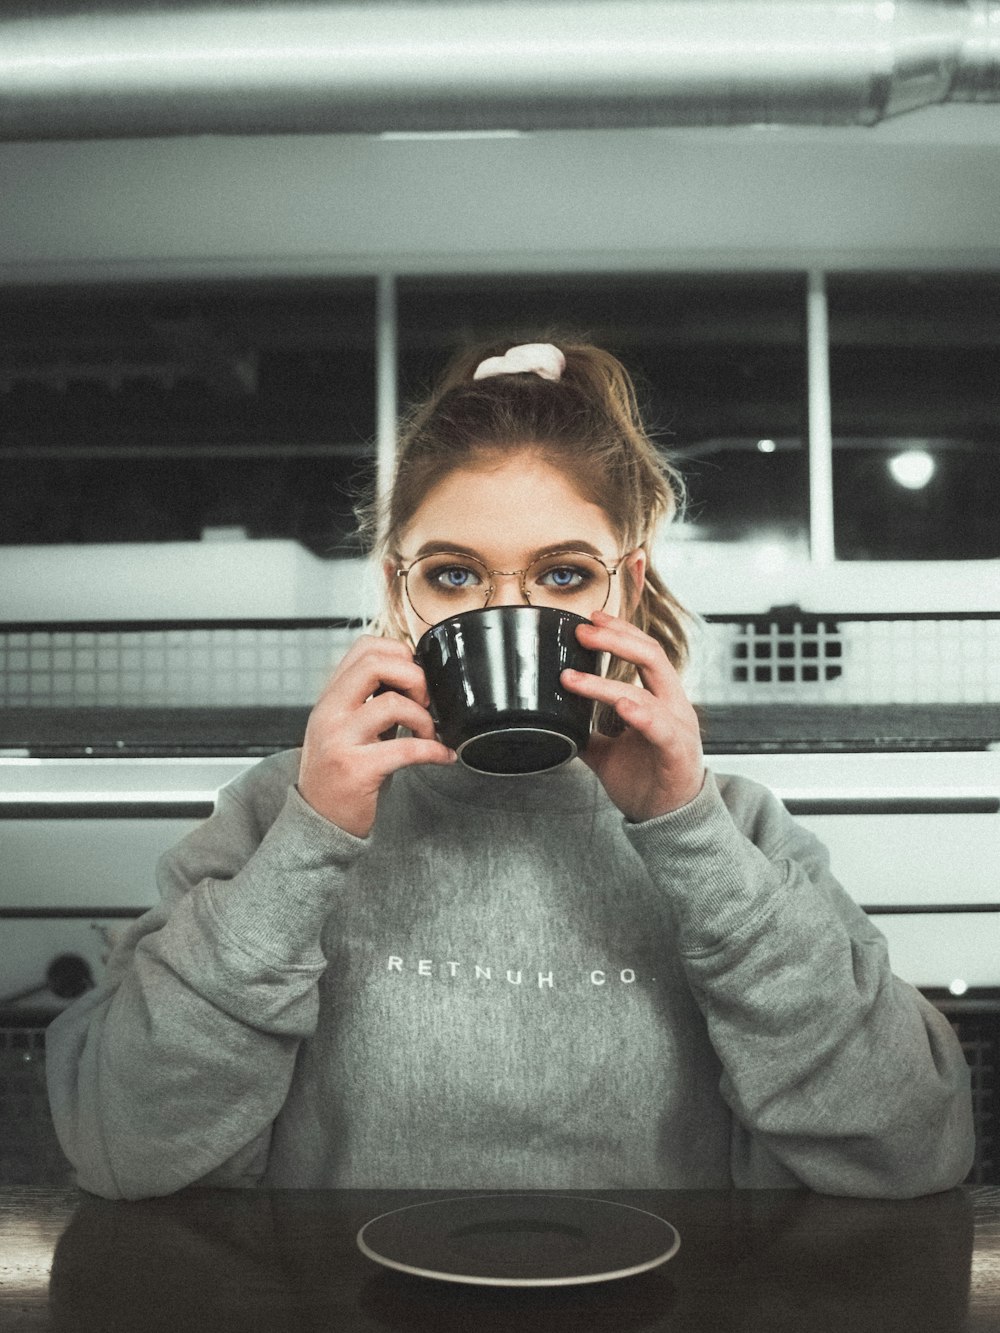 500+ Drinking Coffee Pictures [HD] | Download Free Images on Unsplash